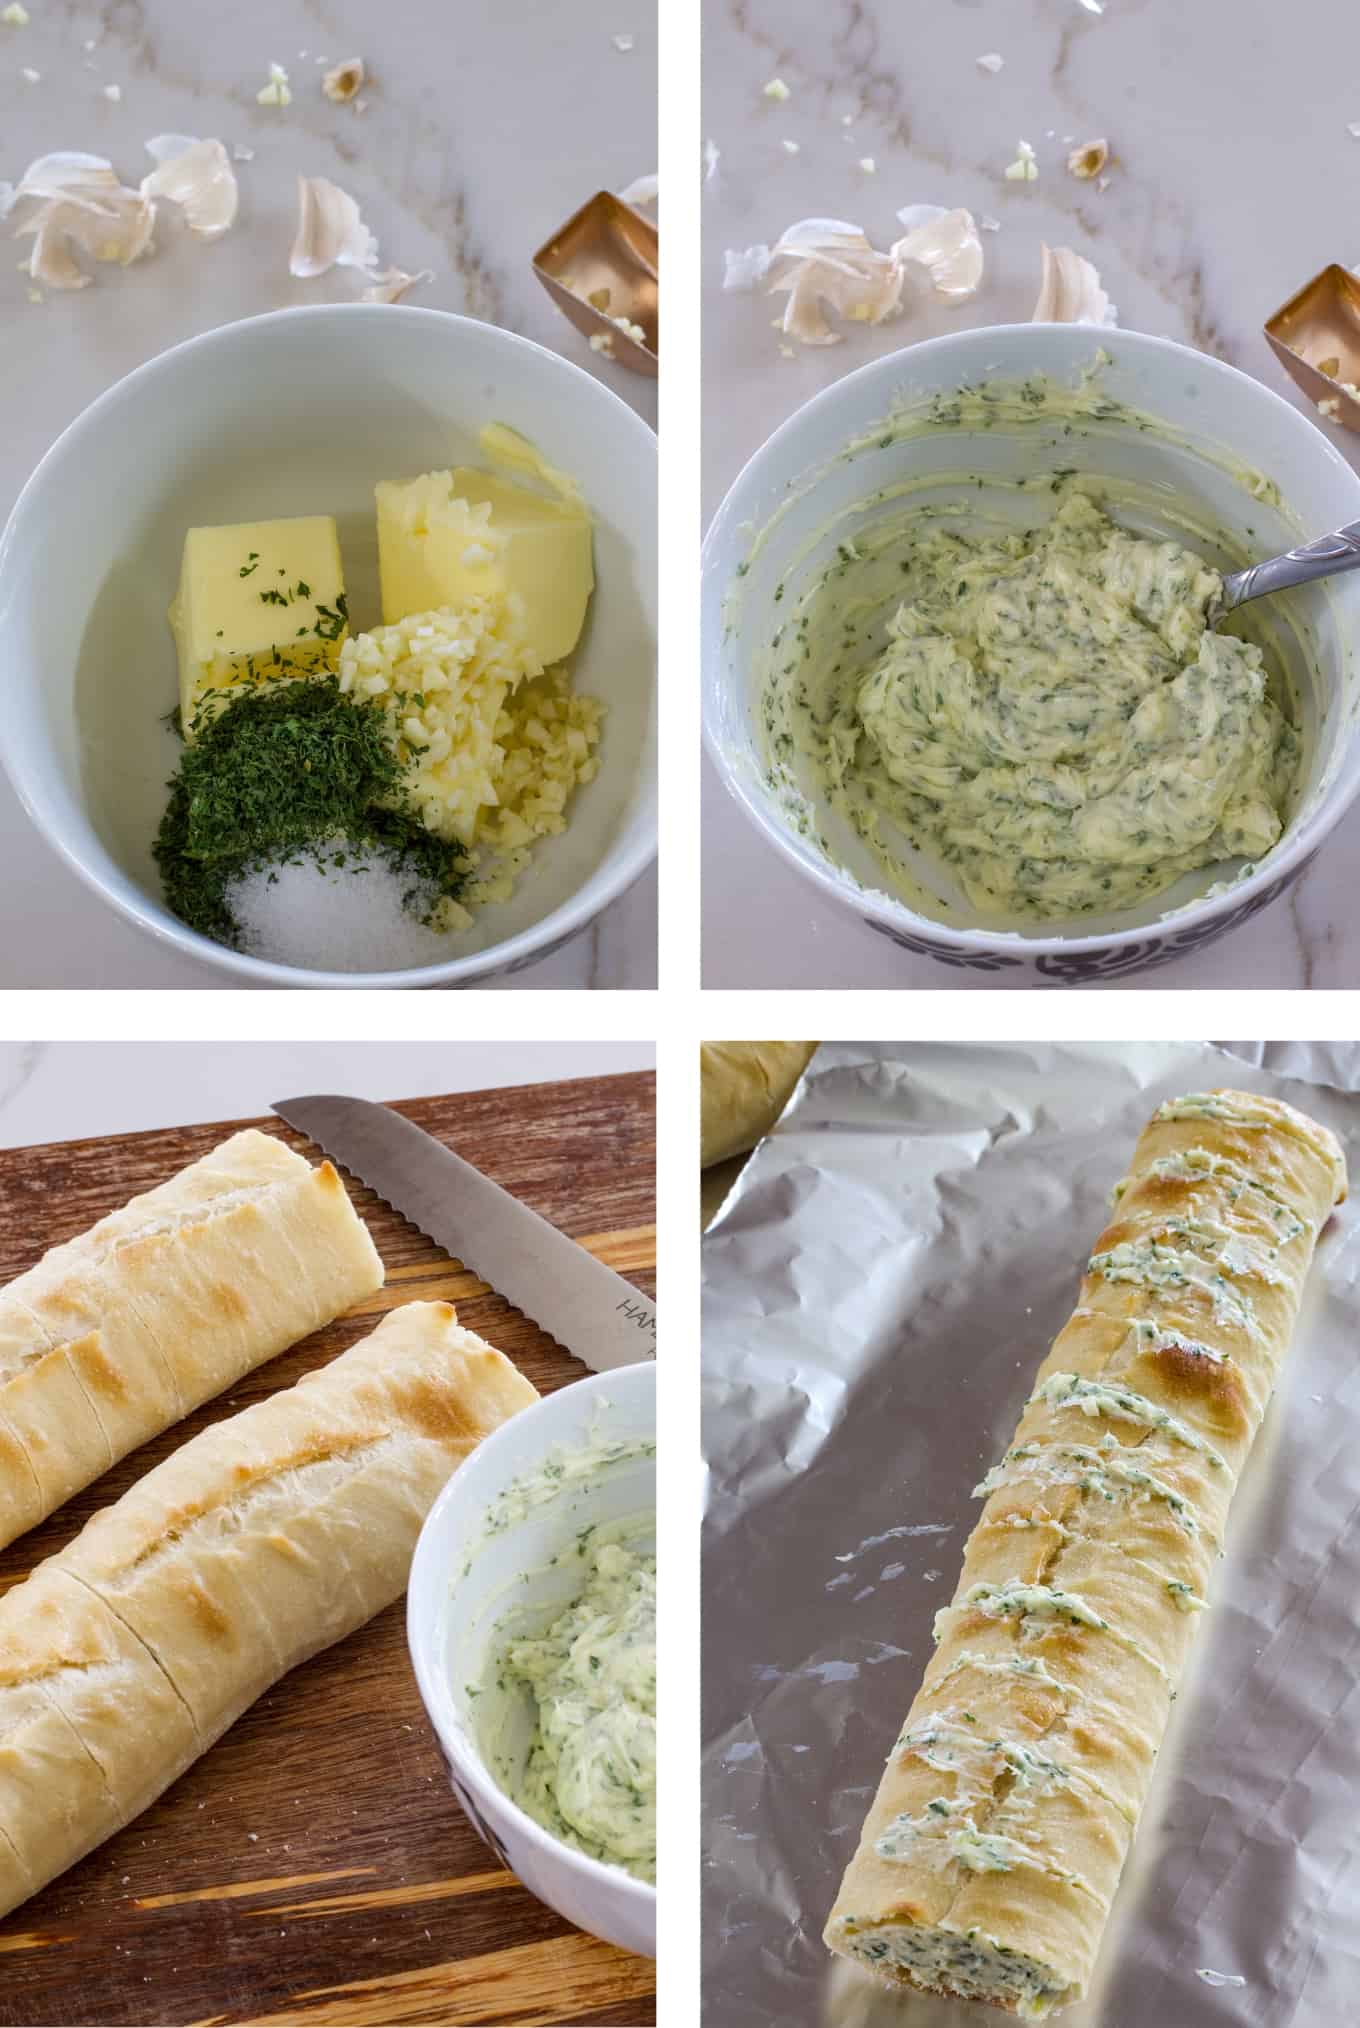 A collage of images showing the steps to prepare the bread for baking.